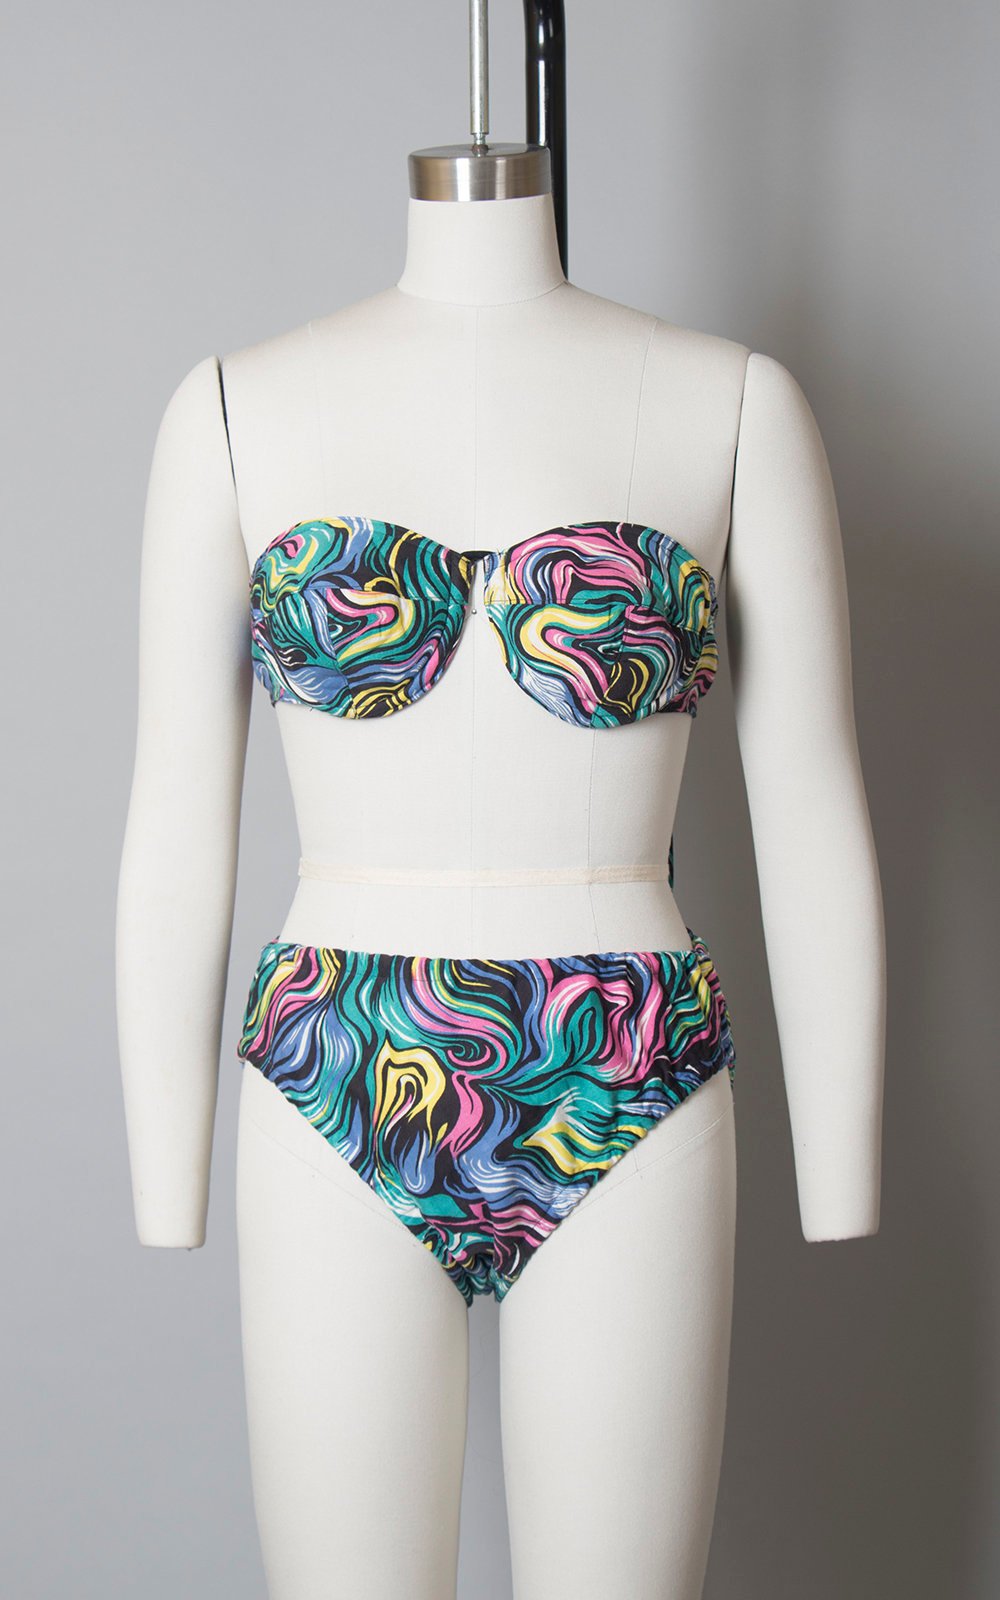 Vintage 1950s Bikini | 50s Psychedelic Swirl Printed Swimsuit Strapless Underwire Bra Low Rise Bathing Suit (small/medium)